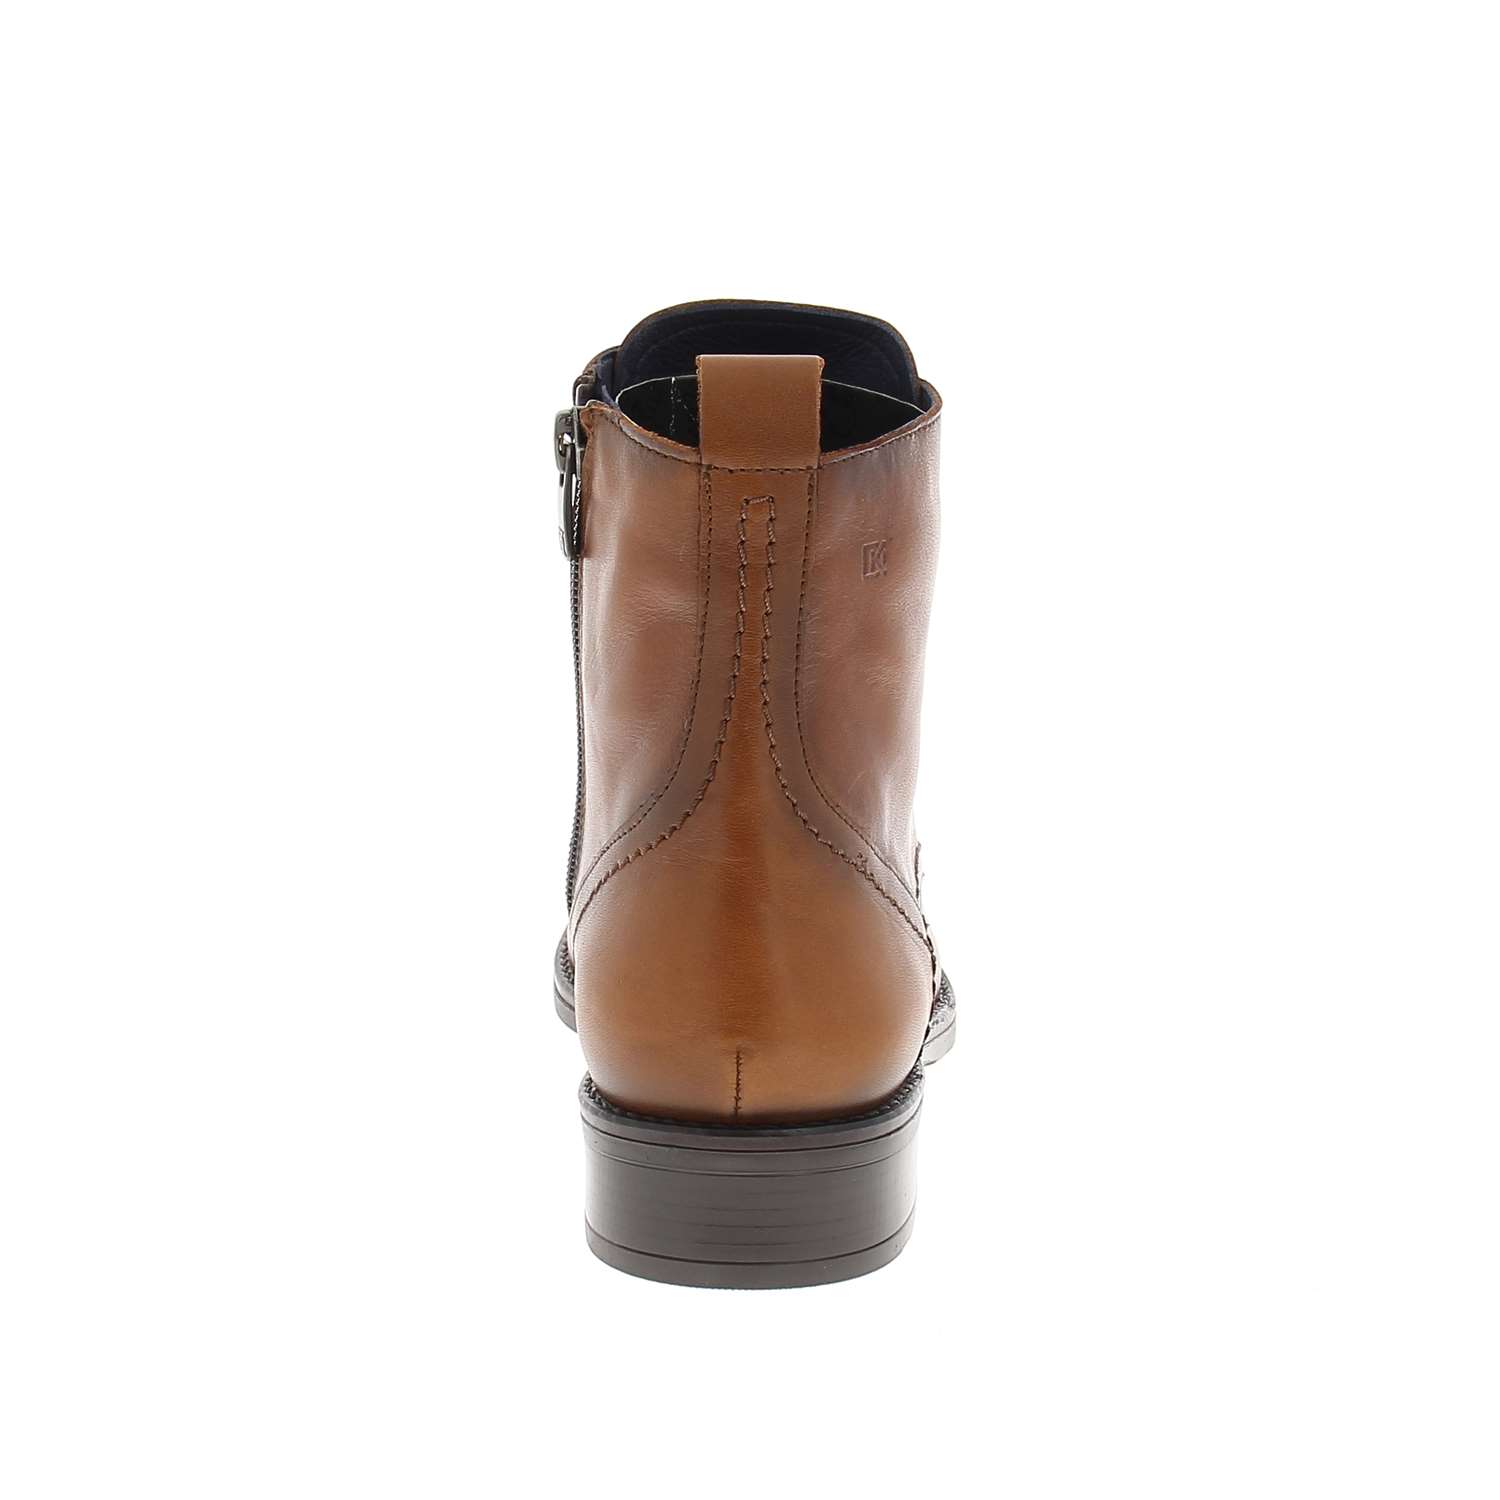 04 - DOSEPTO -  - Boots et bottines - Cuir